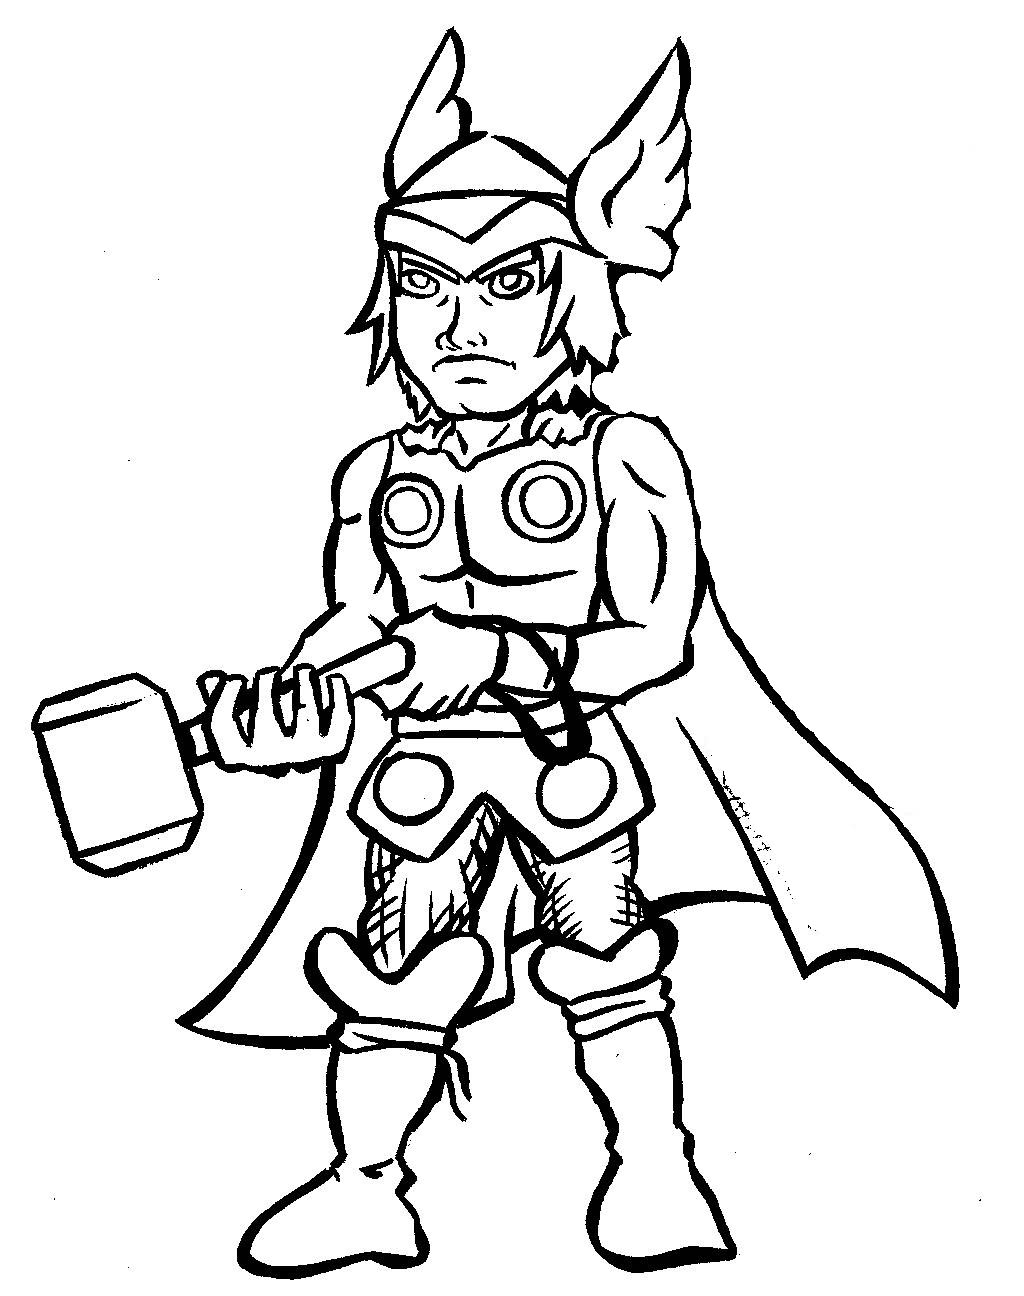 Thor coloring pages to download and print for free